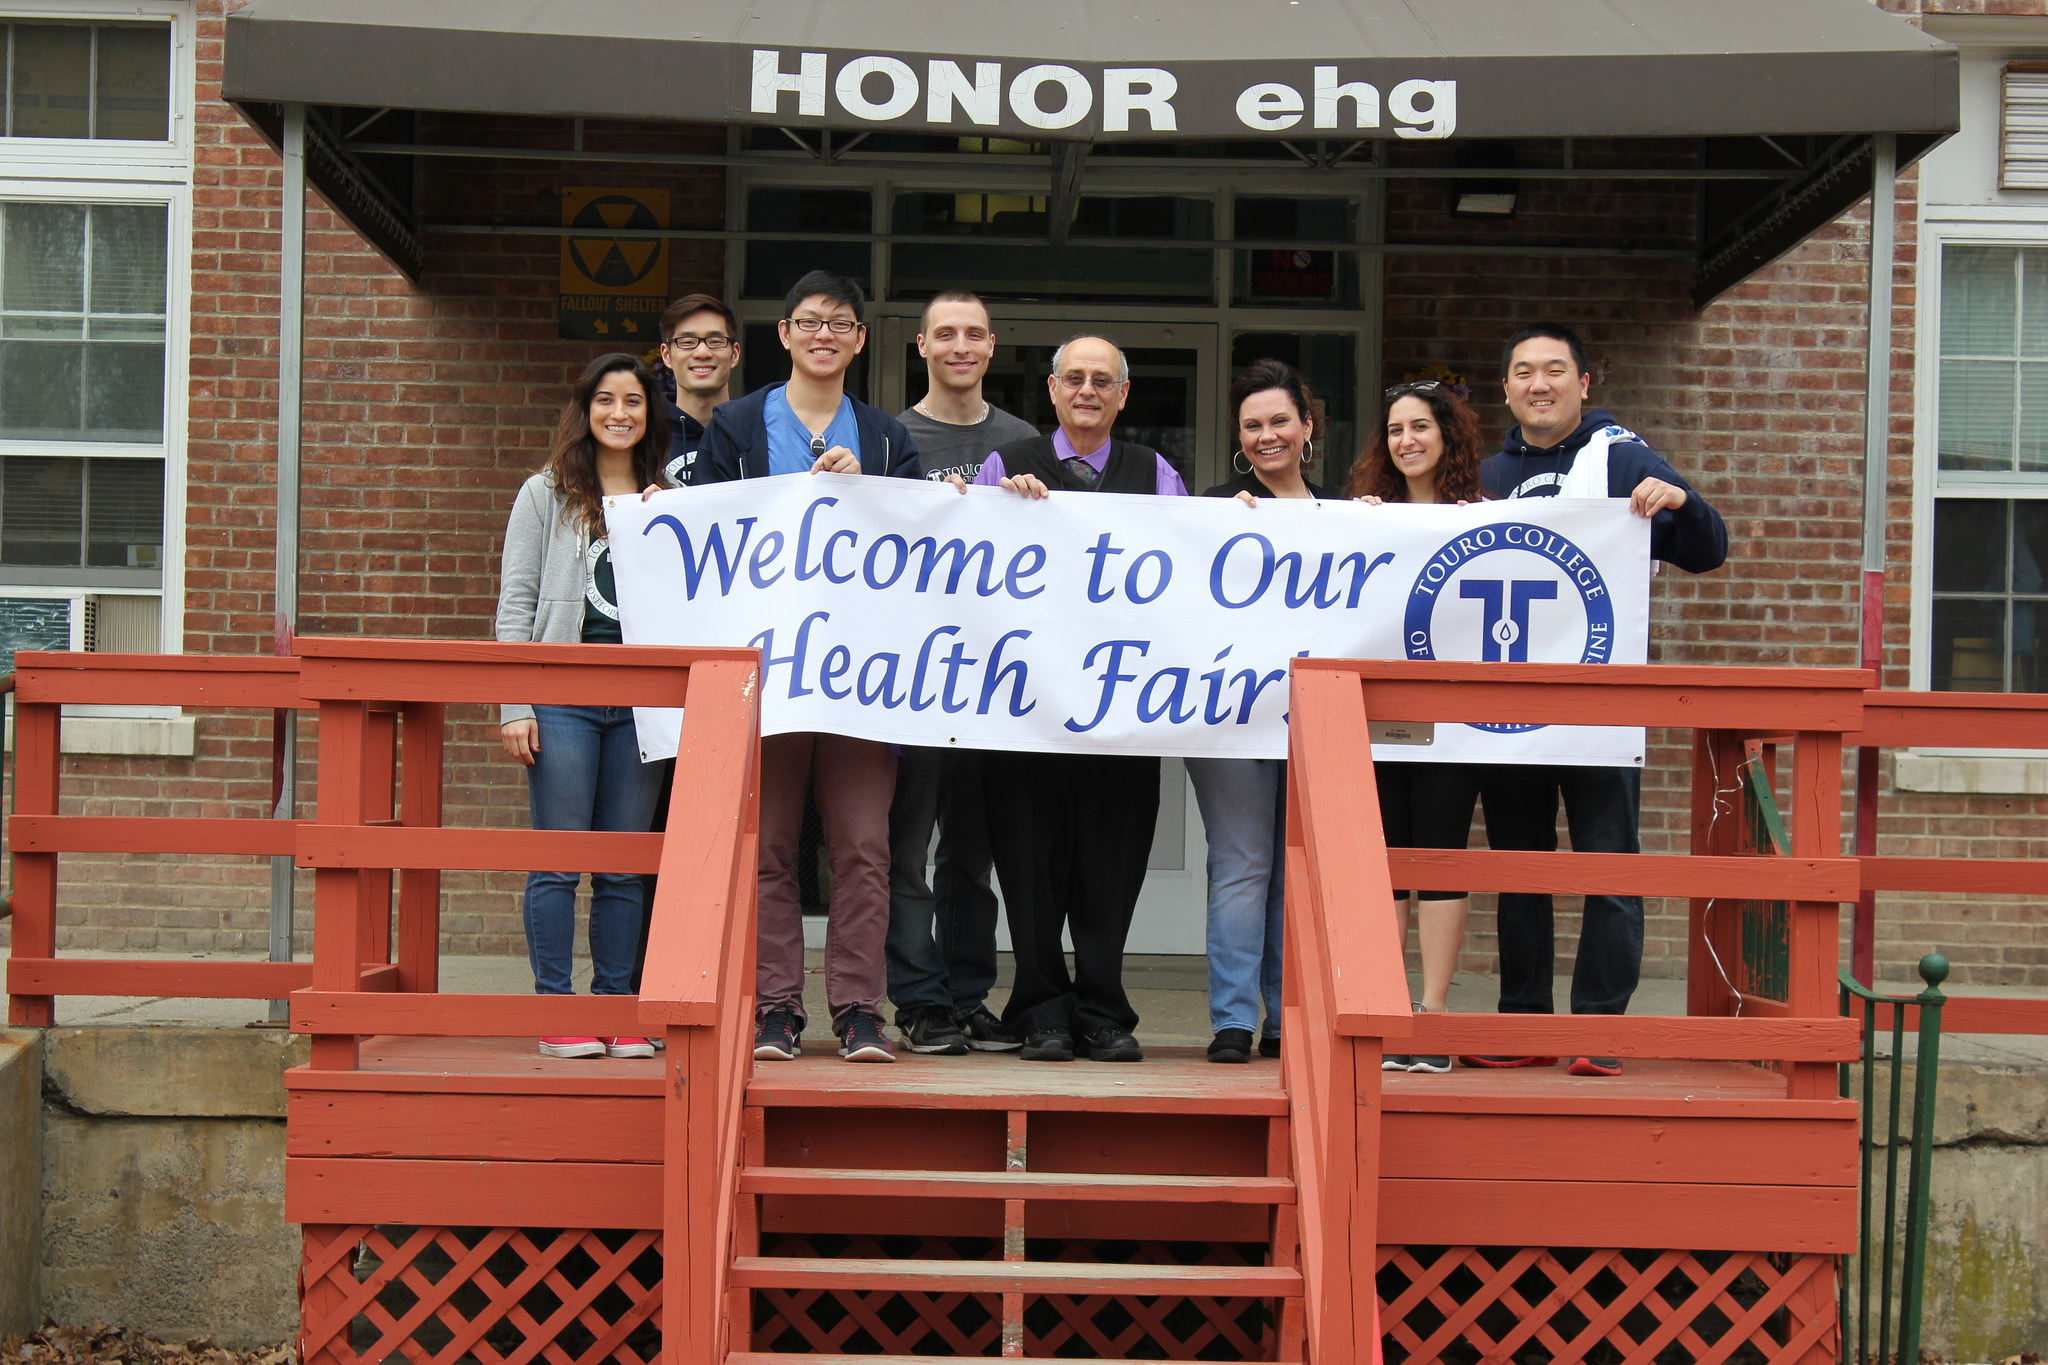 TouroCOM-Middletown students pose in front of the HONORehg building in Middletown, NY, where they held their first community health fair.